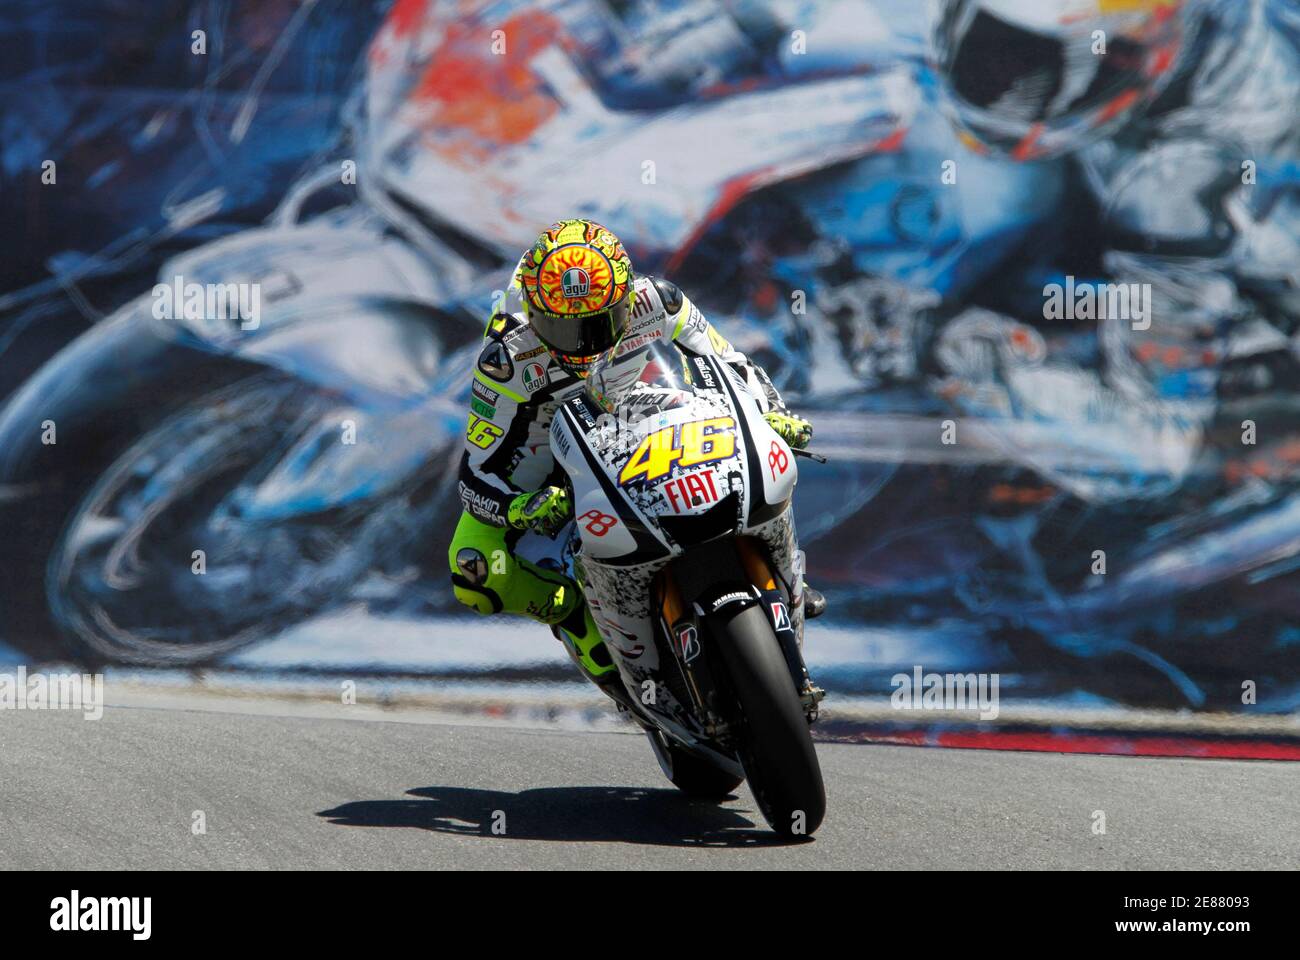 Yamaha MotoGP rider Valentino Rossi of Italy races during the first  practice round of the U.S. Grand Prix at Laguna Seca Raceway in Monterey,  California July 23, 2010. REUTERS/David Royal (UNITED STATES -